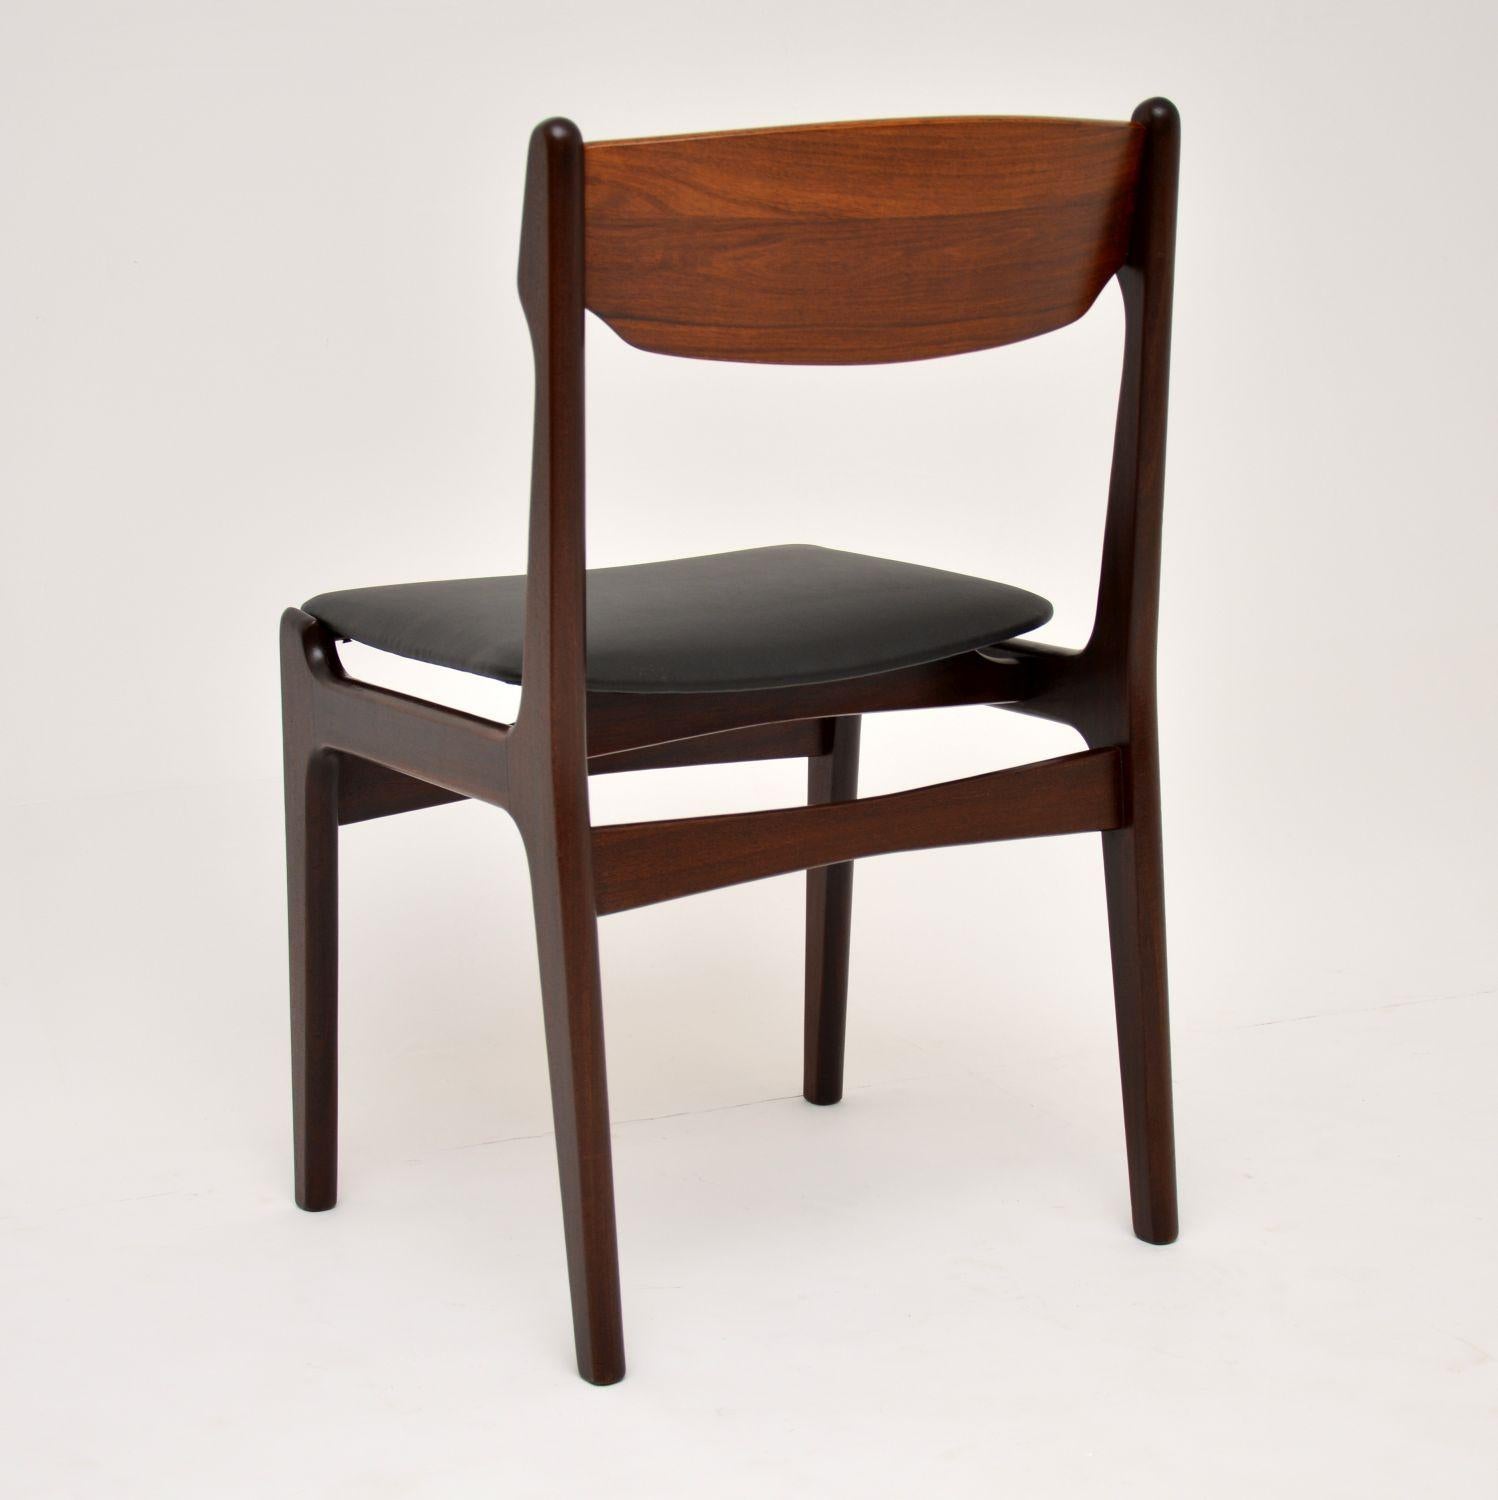 Wood 1960s Set of 6 Danish Dining Chairs